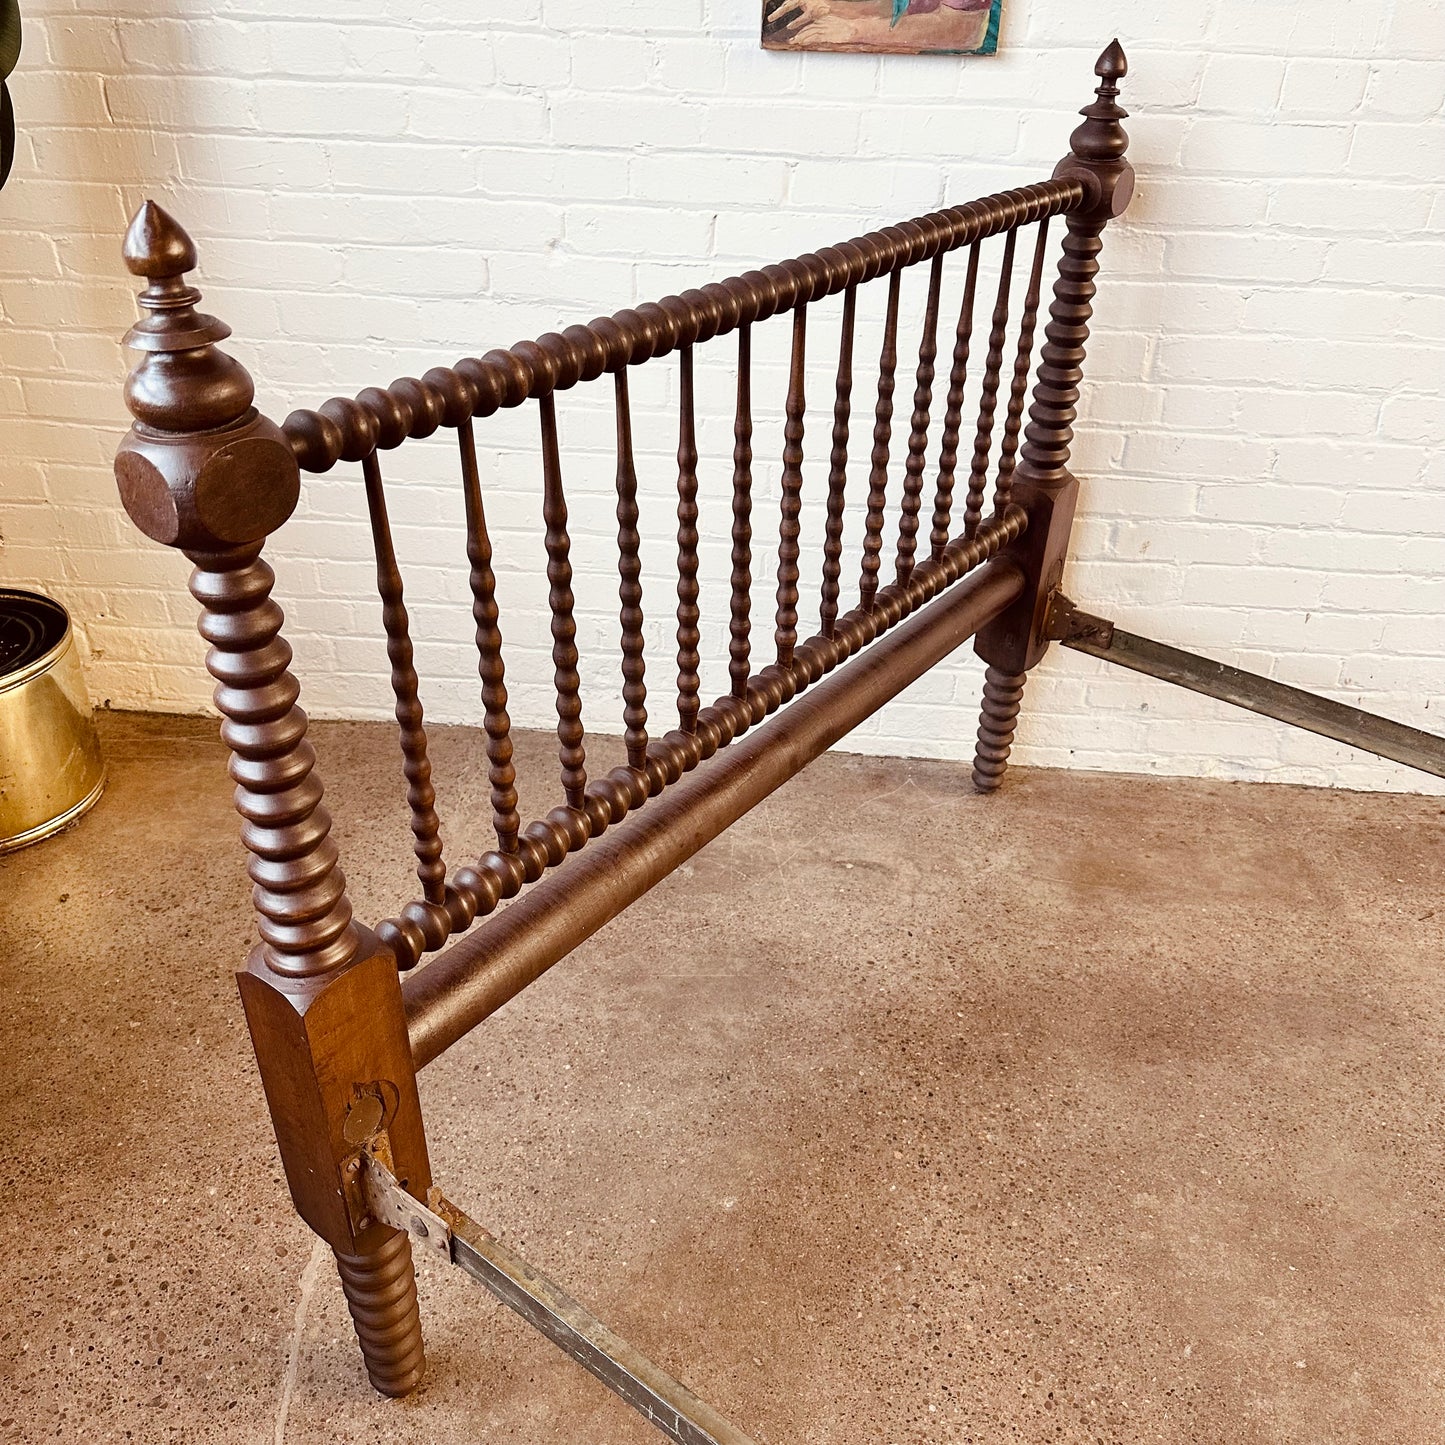 ANTIQUE JENNY LIND SPINDLE SPOOL BED - SIZE FULL